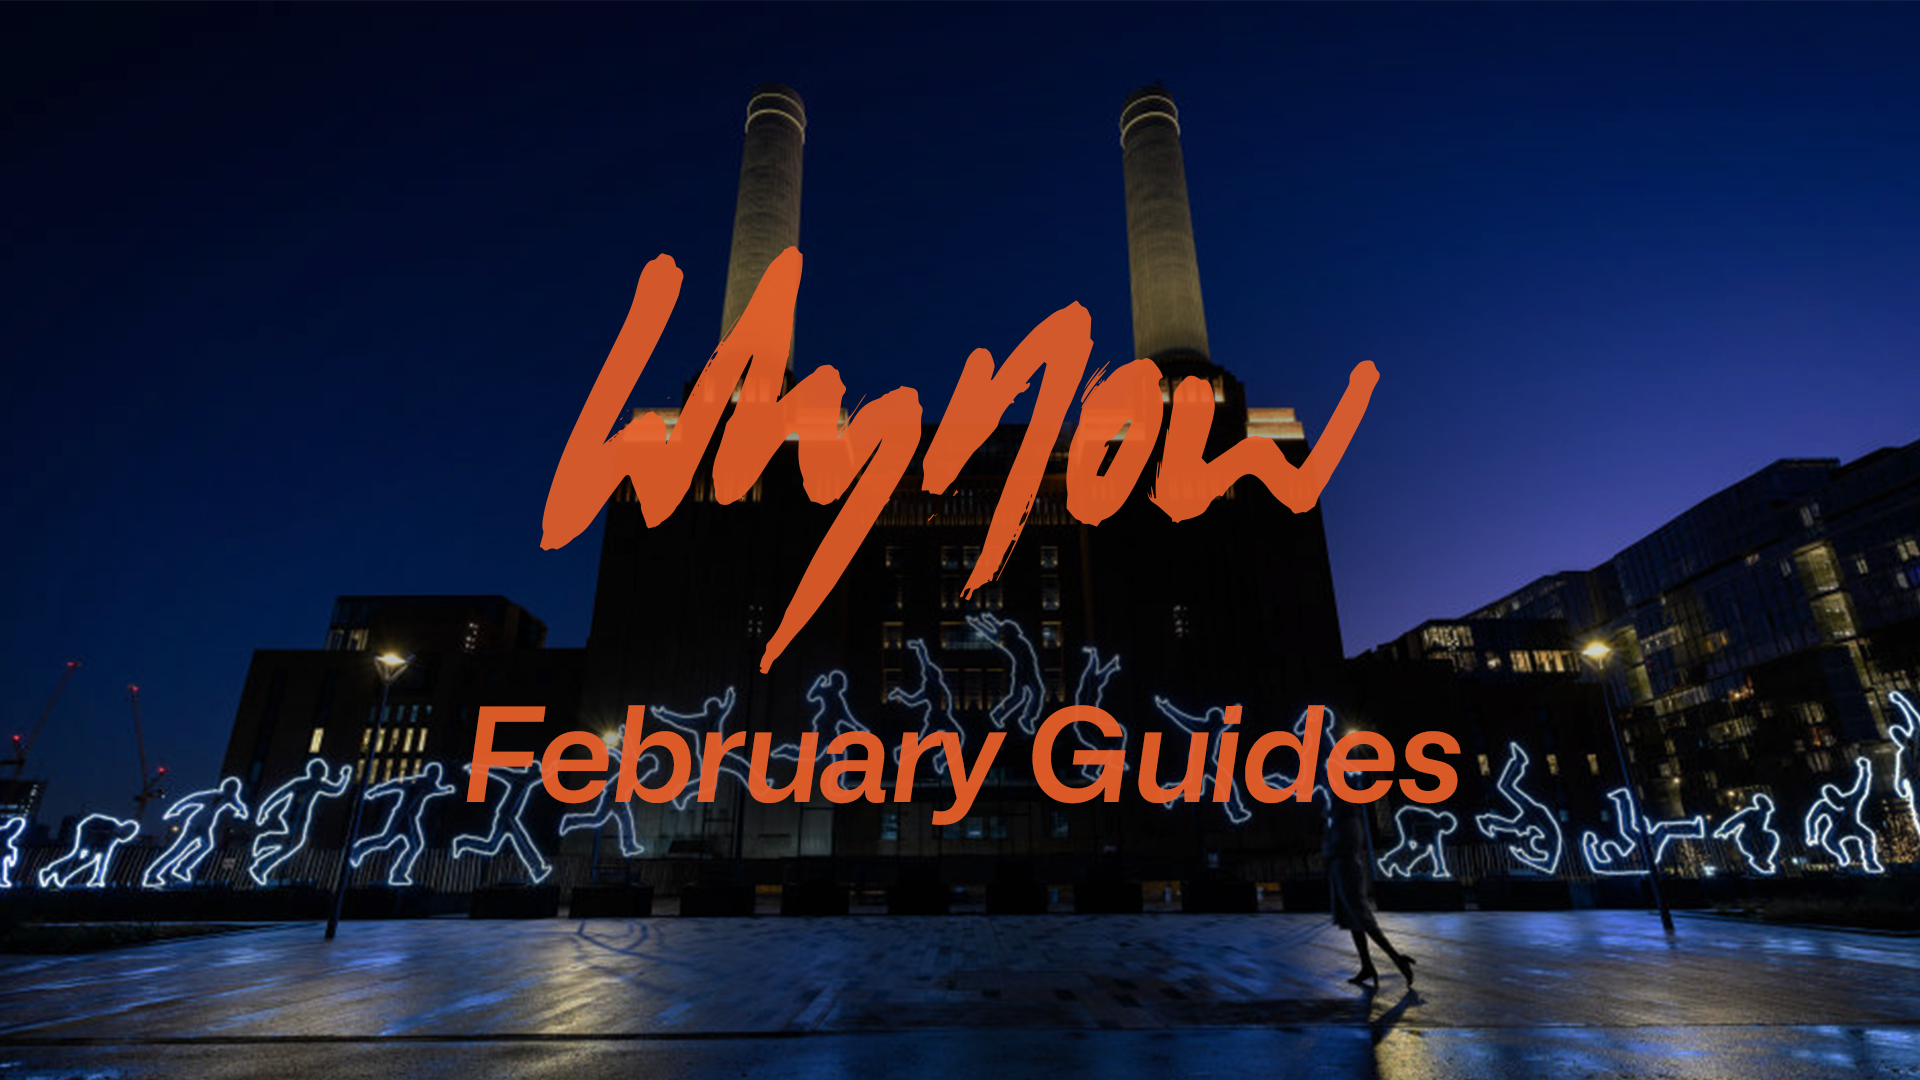 whynow February events guide